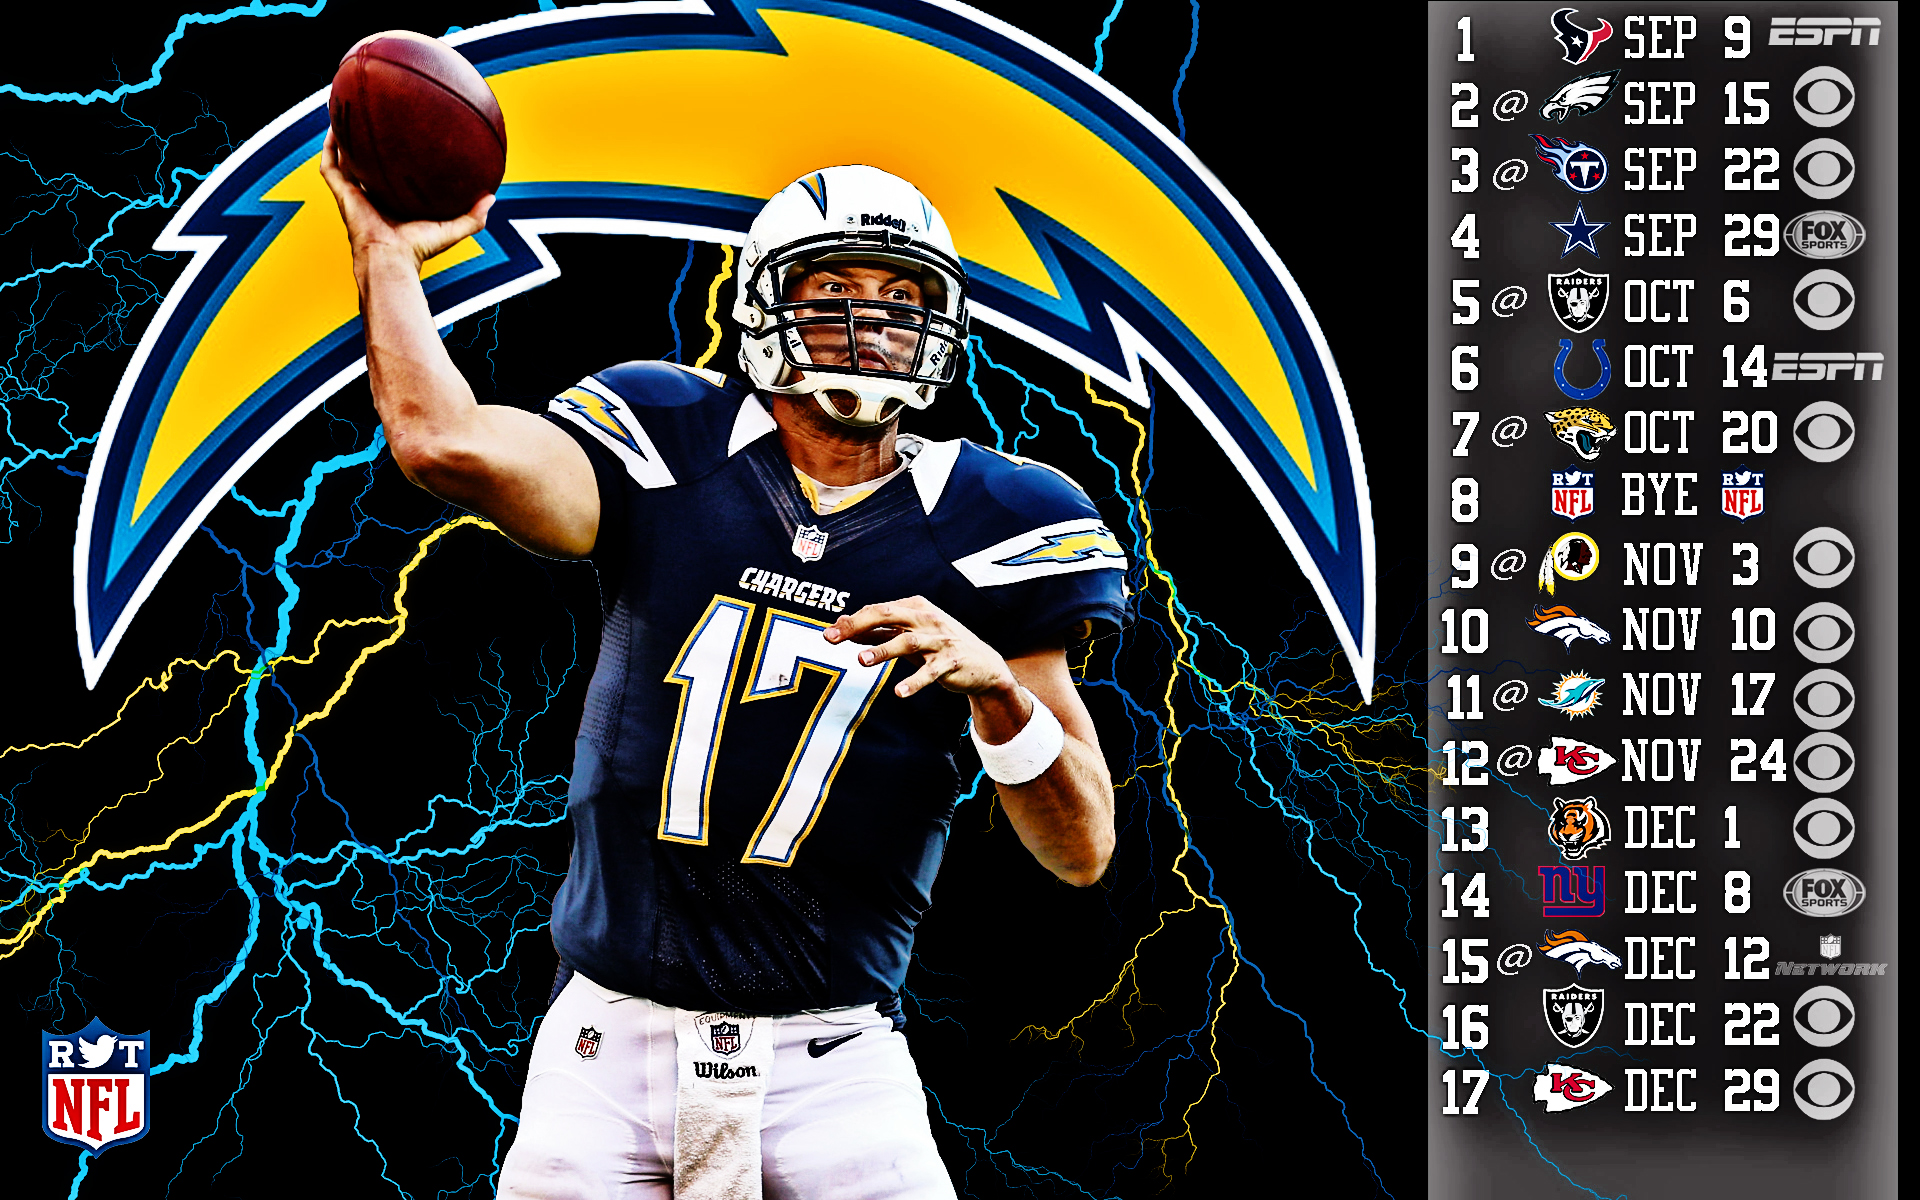 2013 San Diego Chargers football nfl wallpaper 1920x1200 130426